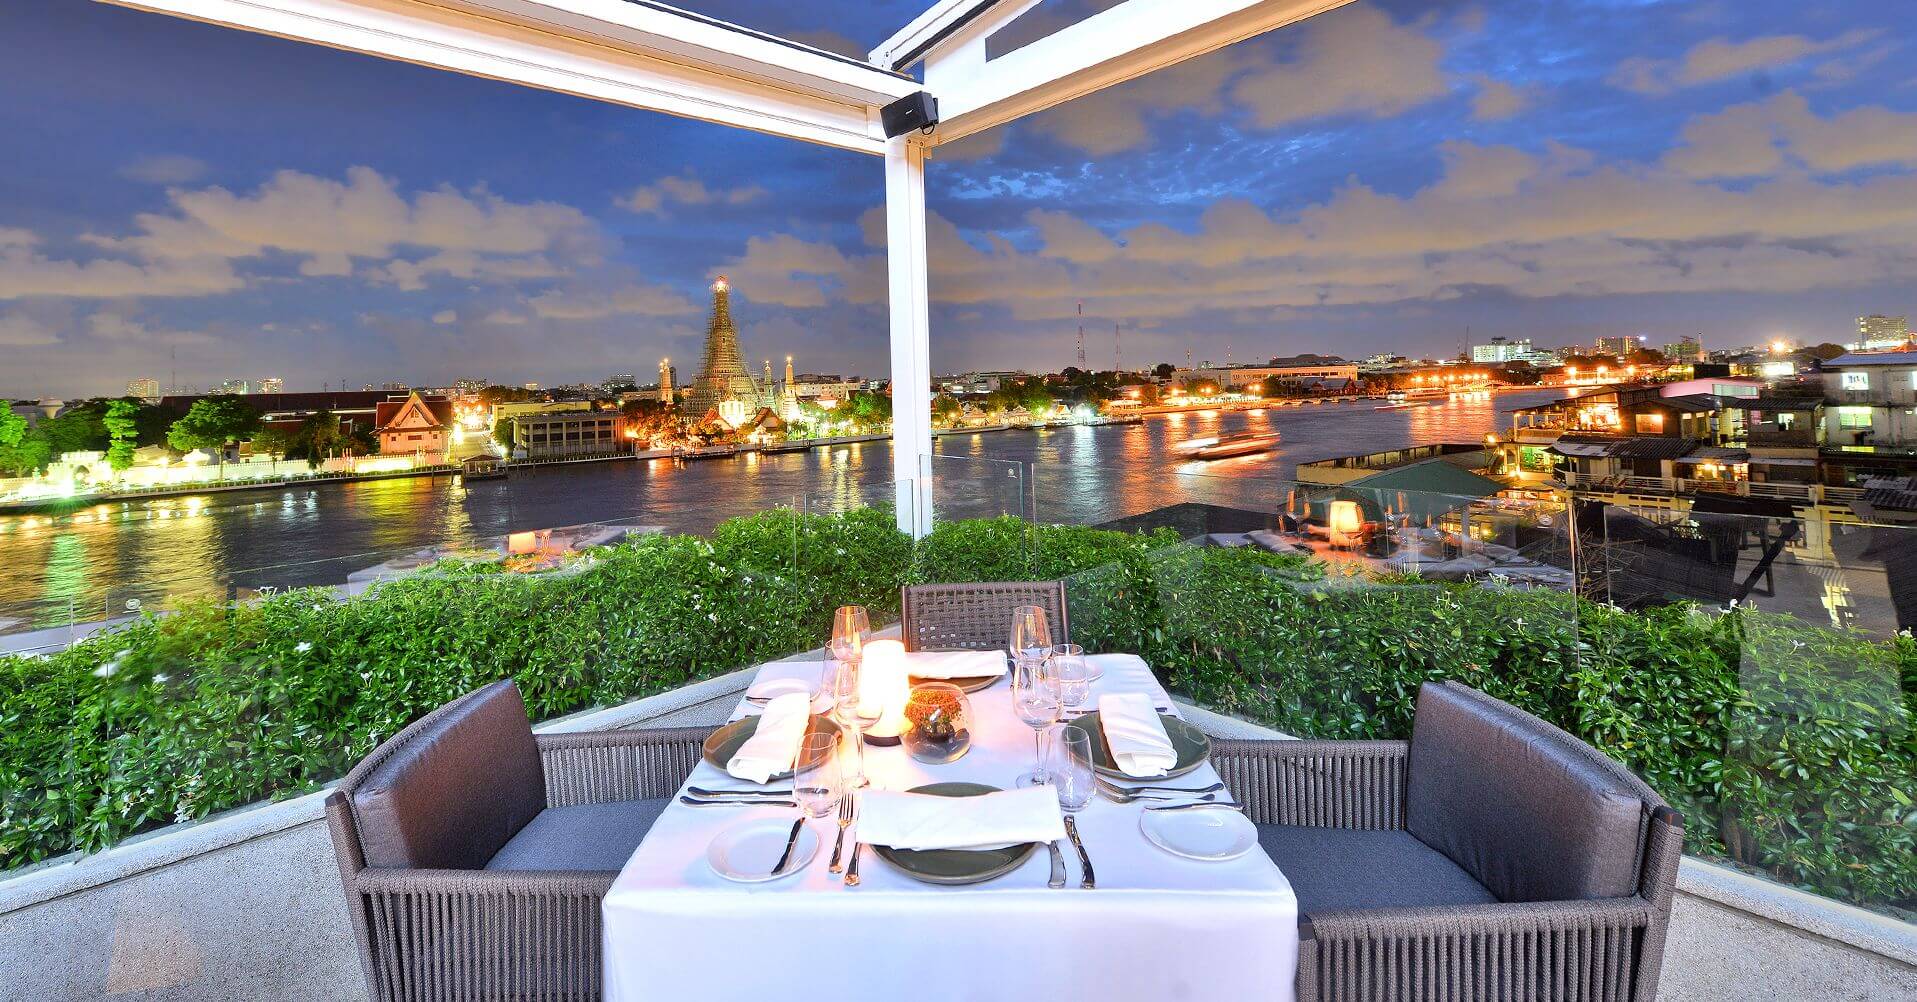 Xx Restaurants Along Chao Phraya River In Bangkok You Need To Visit For The Stunning Views - World Of Buzz 5